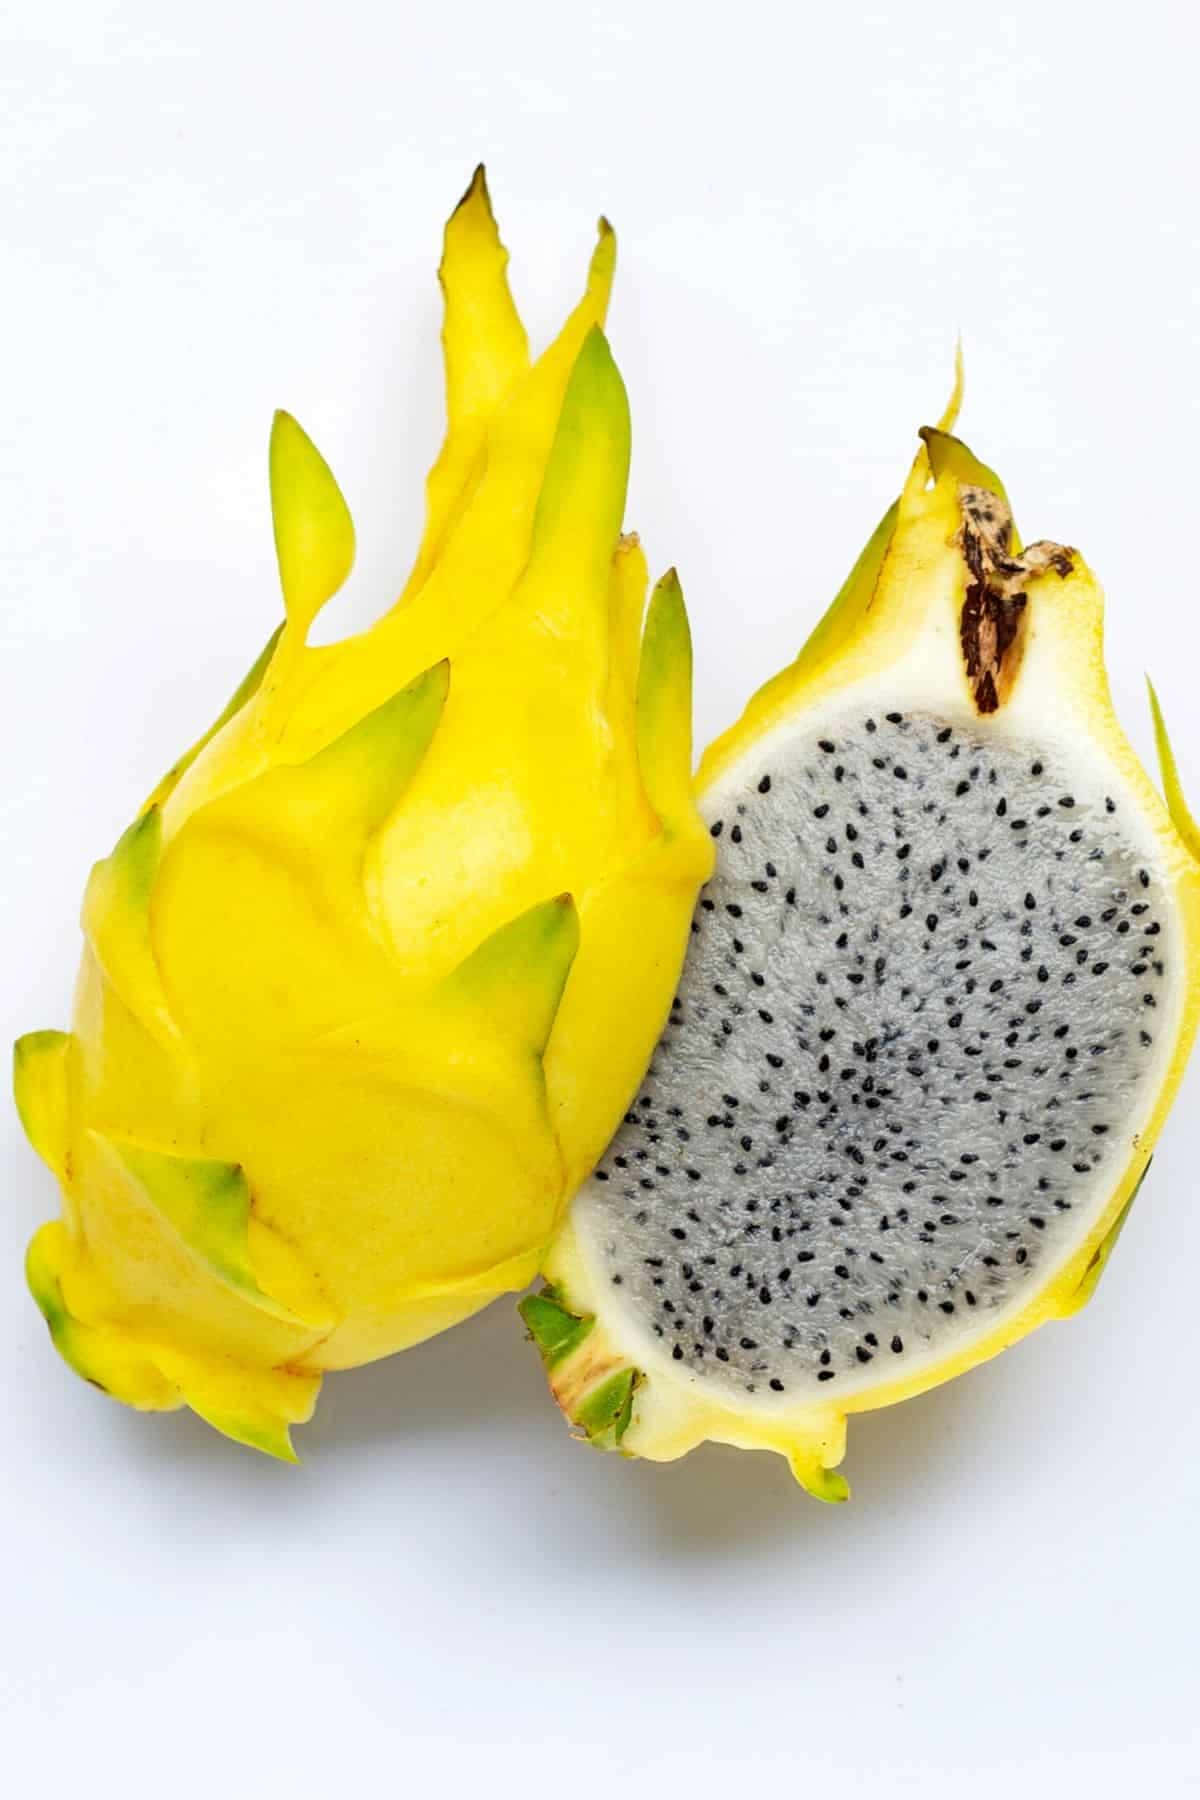 Dragon Fruit Is A Tropical Fruit That Is Sliced In Half